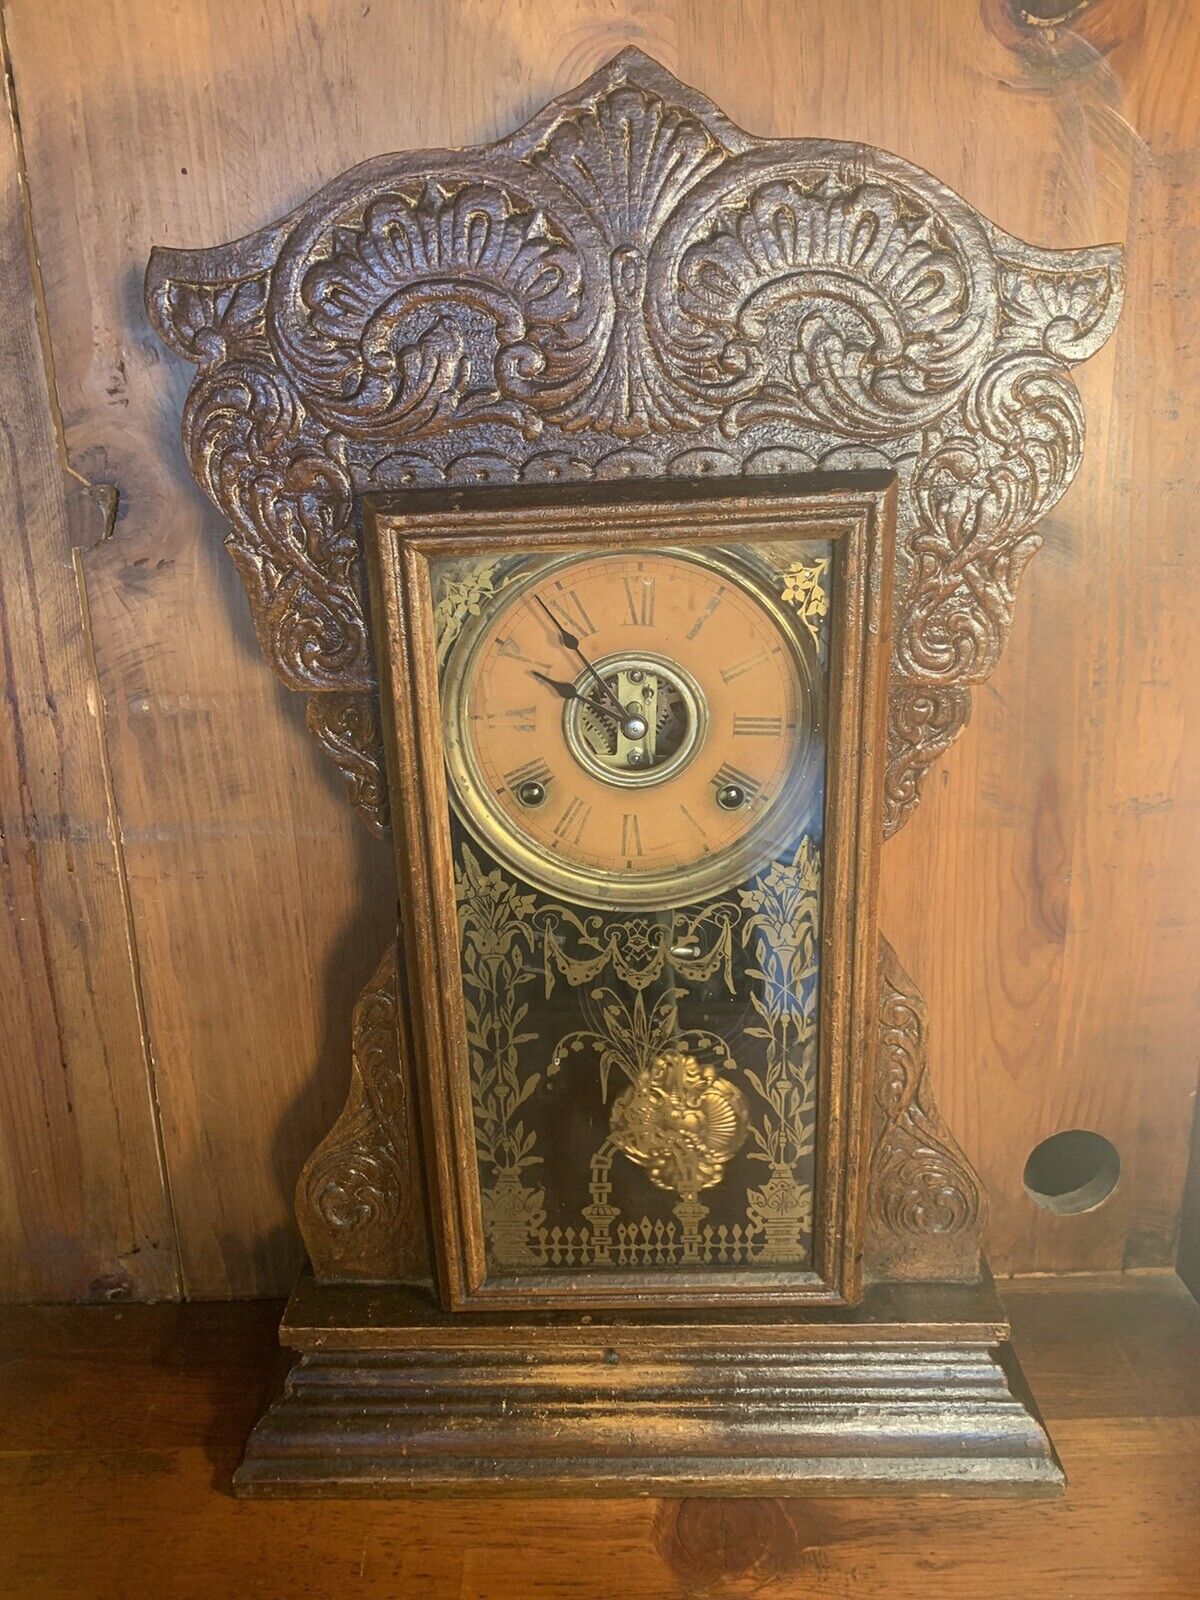 WORKING Antique Gilbert 8 Day Victorian Gingerbread Parlor Mantel Clock Nice